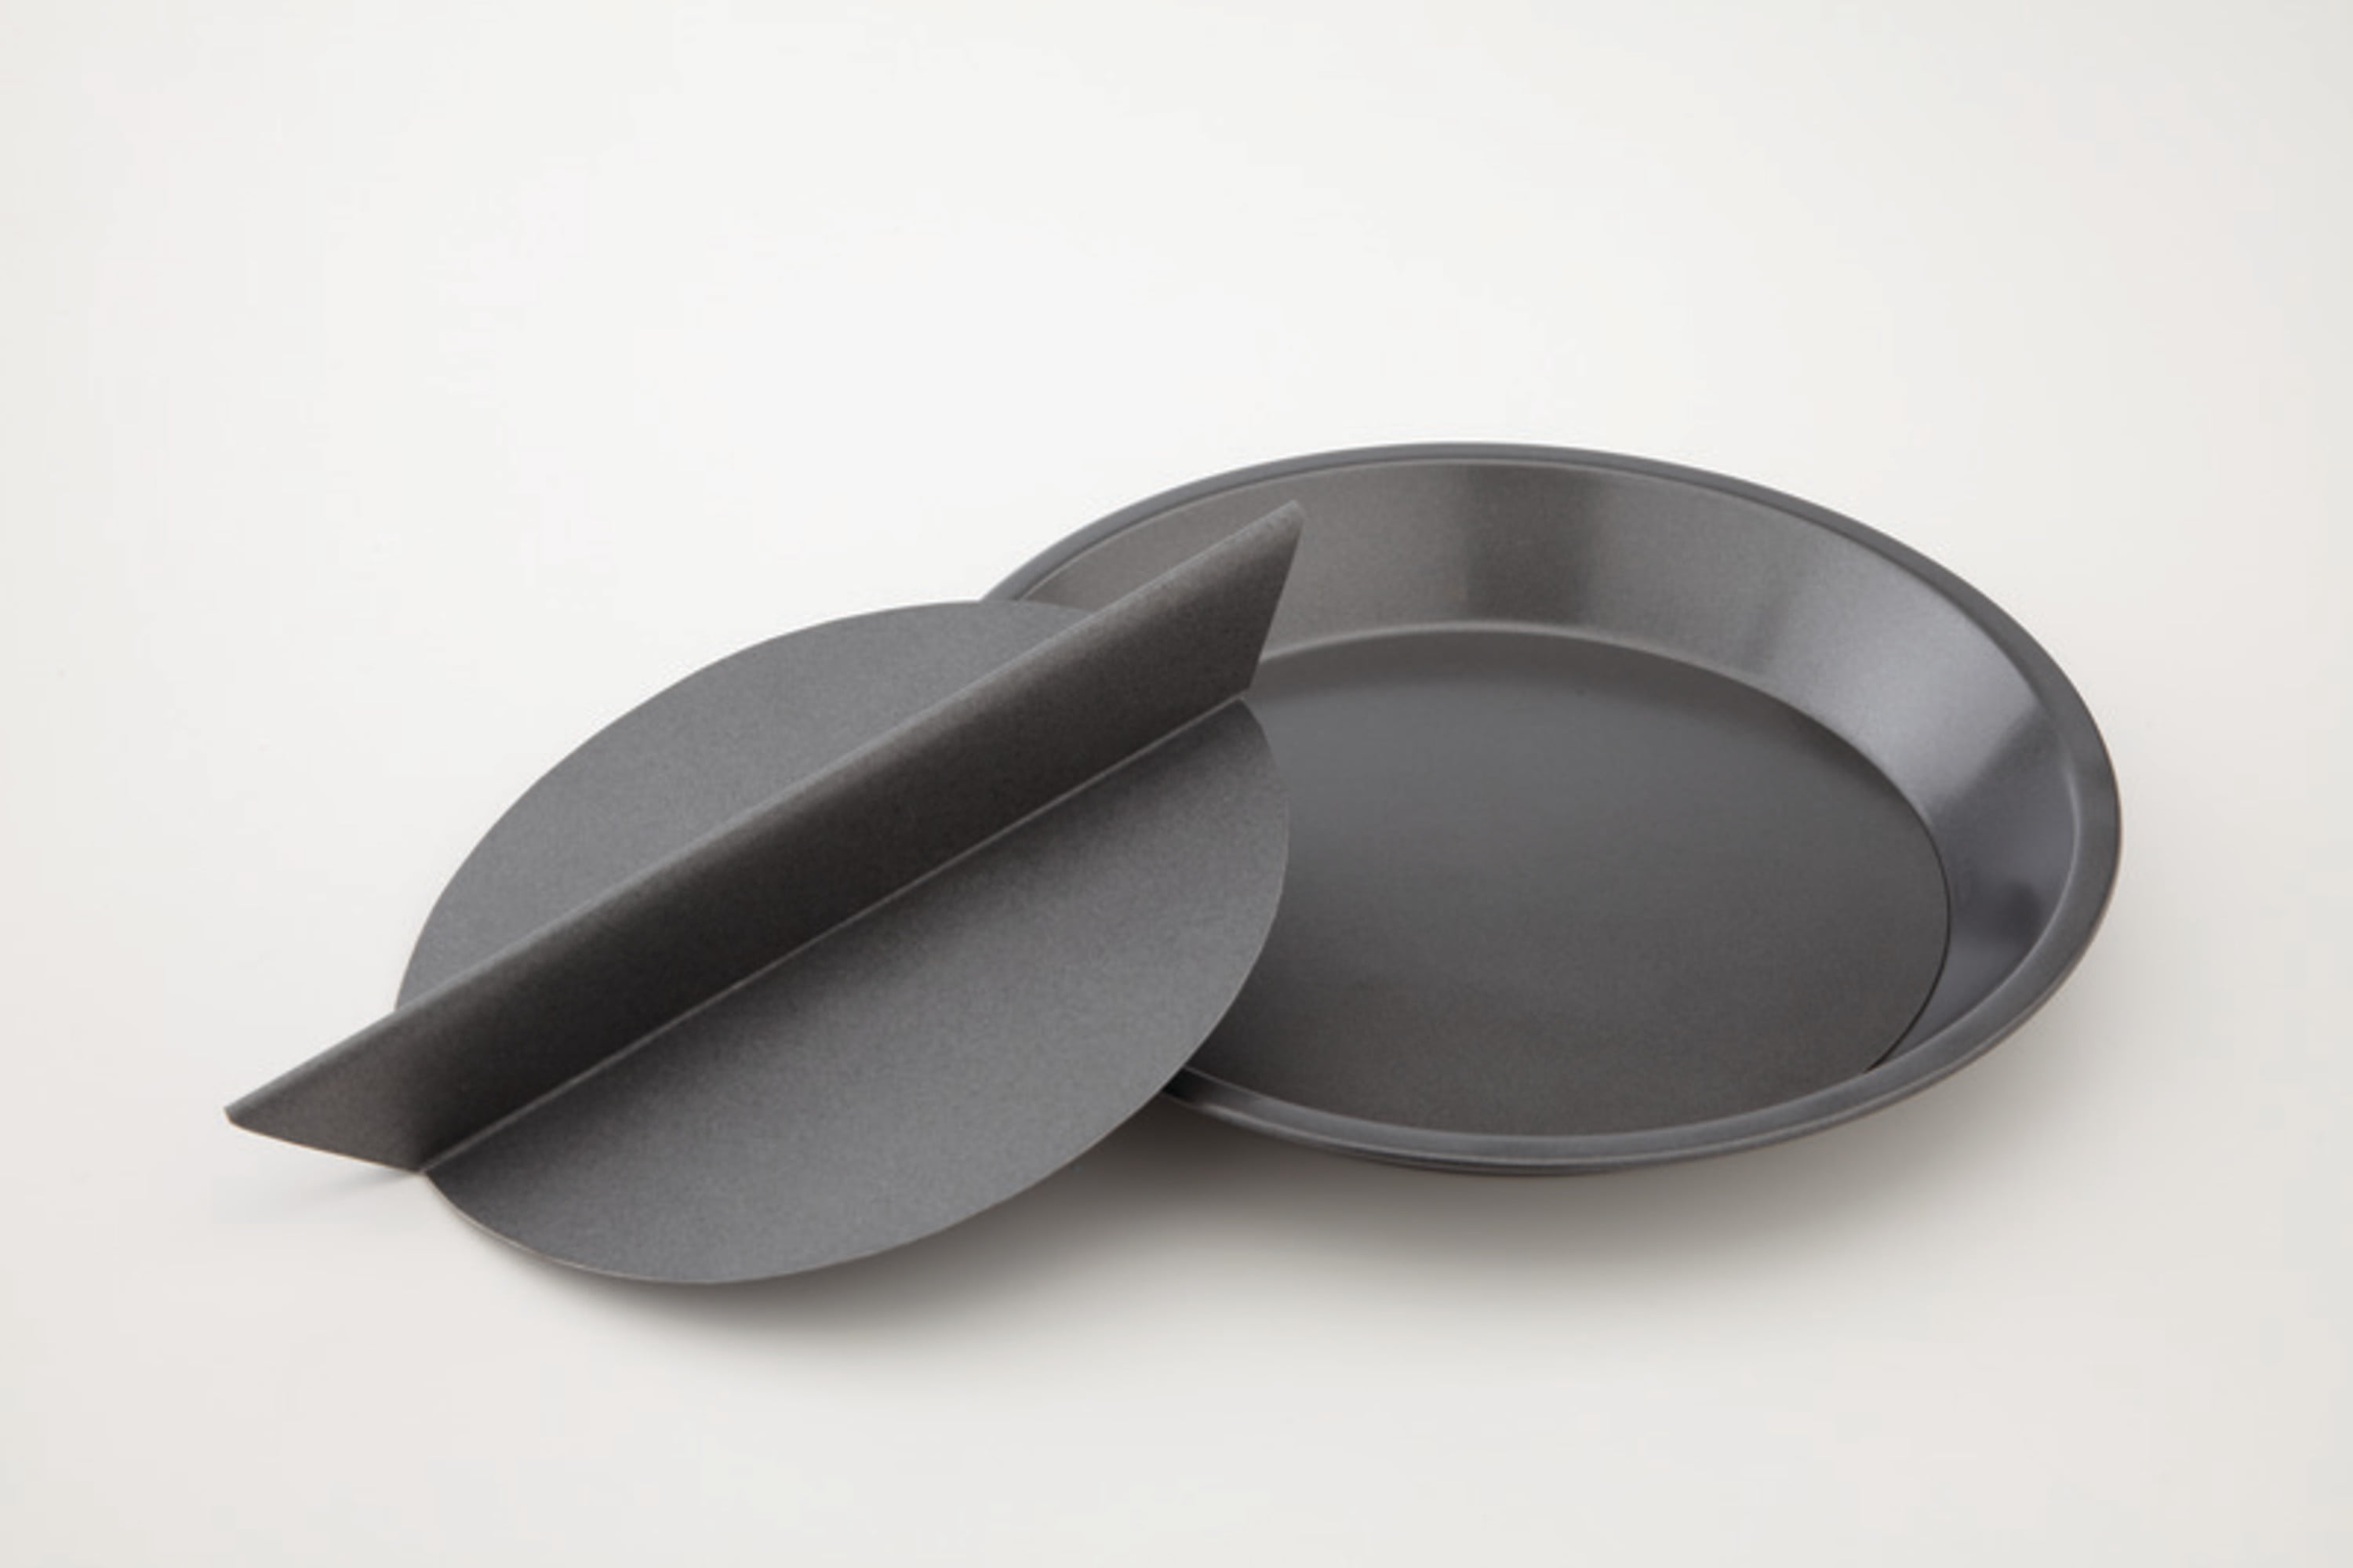 Split Decision Pie Pan Recipes: This Pan Lets You Make Two Pies at Once